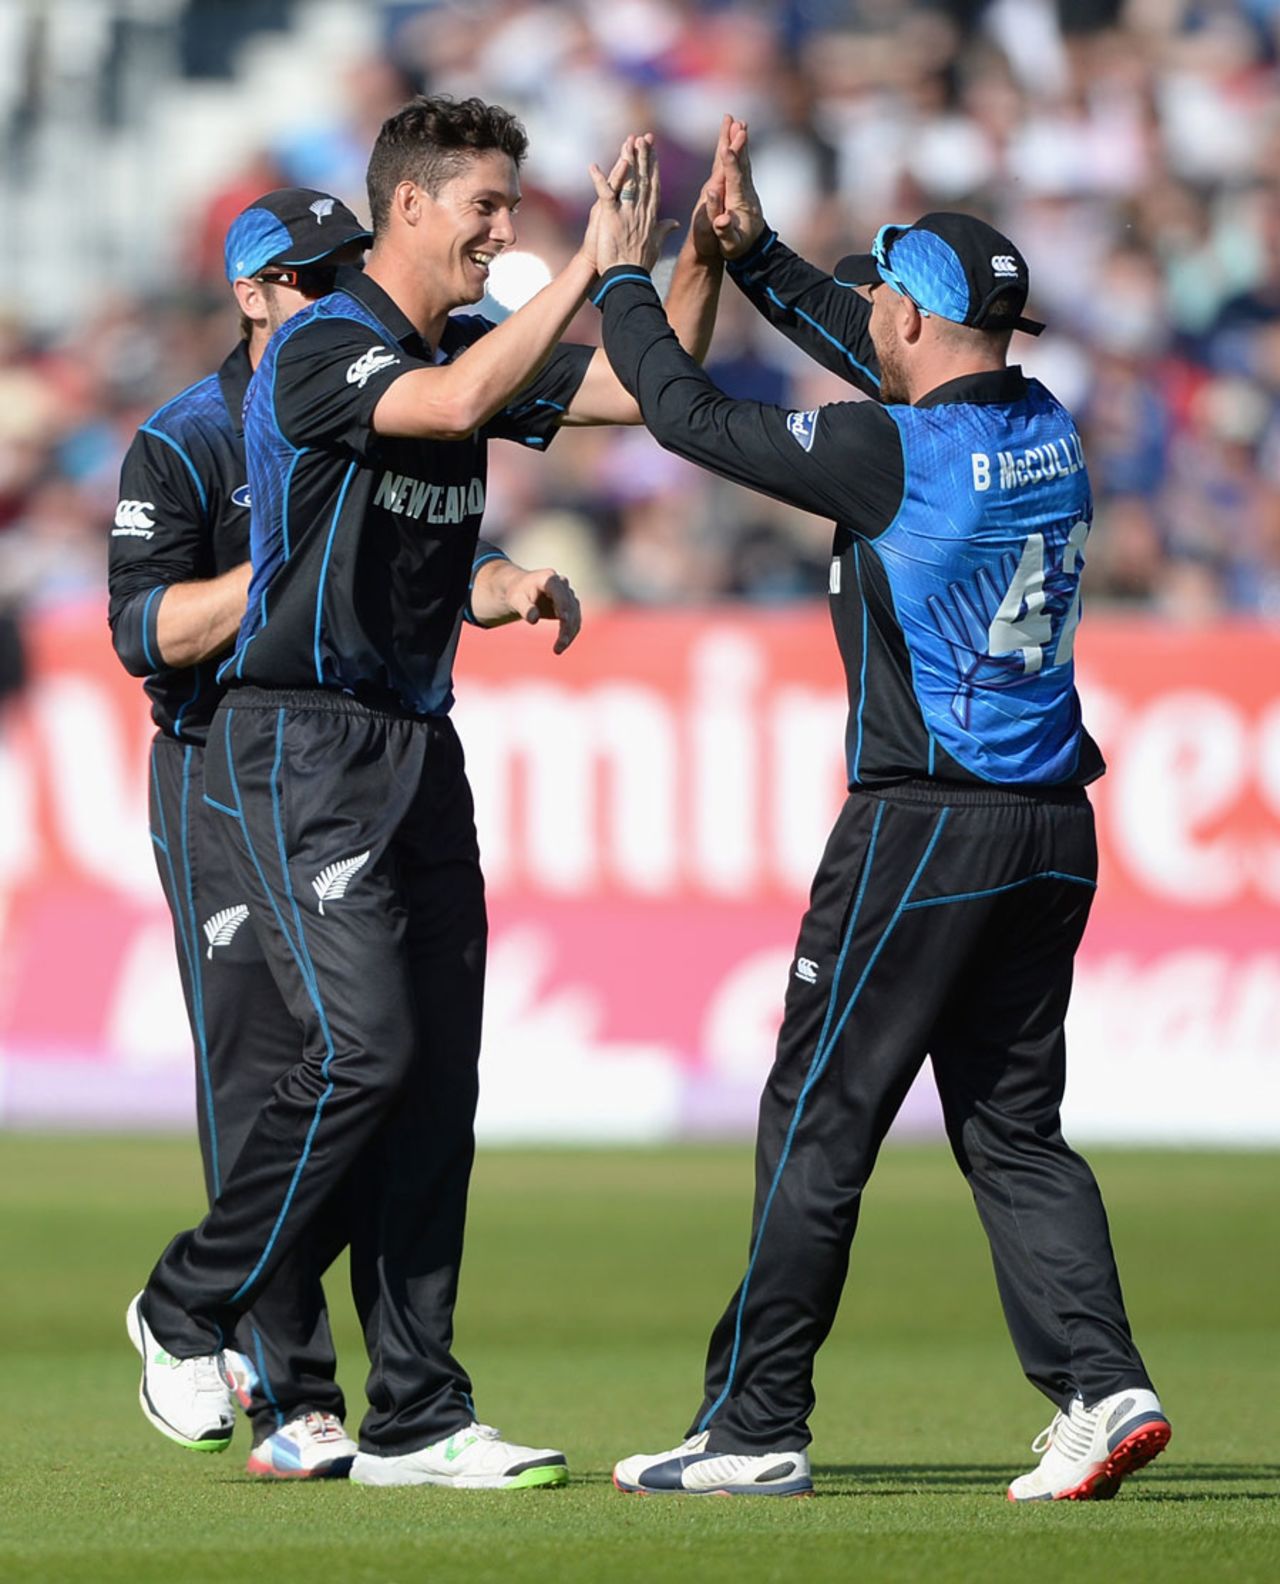 Ben Wheeler gets a couple of high fives from his captain, England v New Zealand, 5th ODI, Chester-le-Street, June 20, 2015